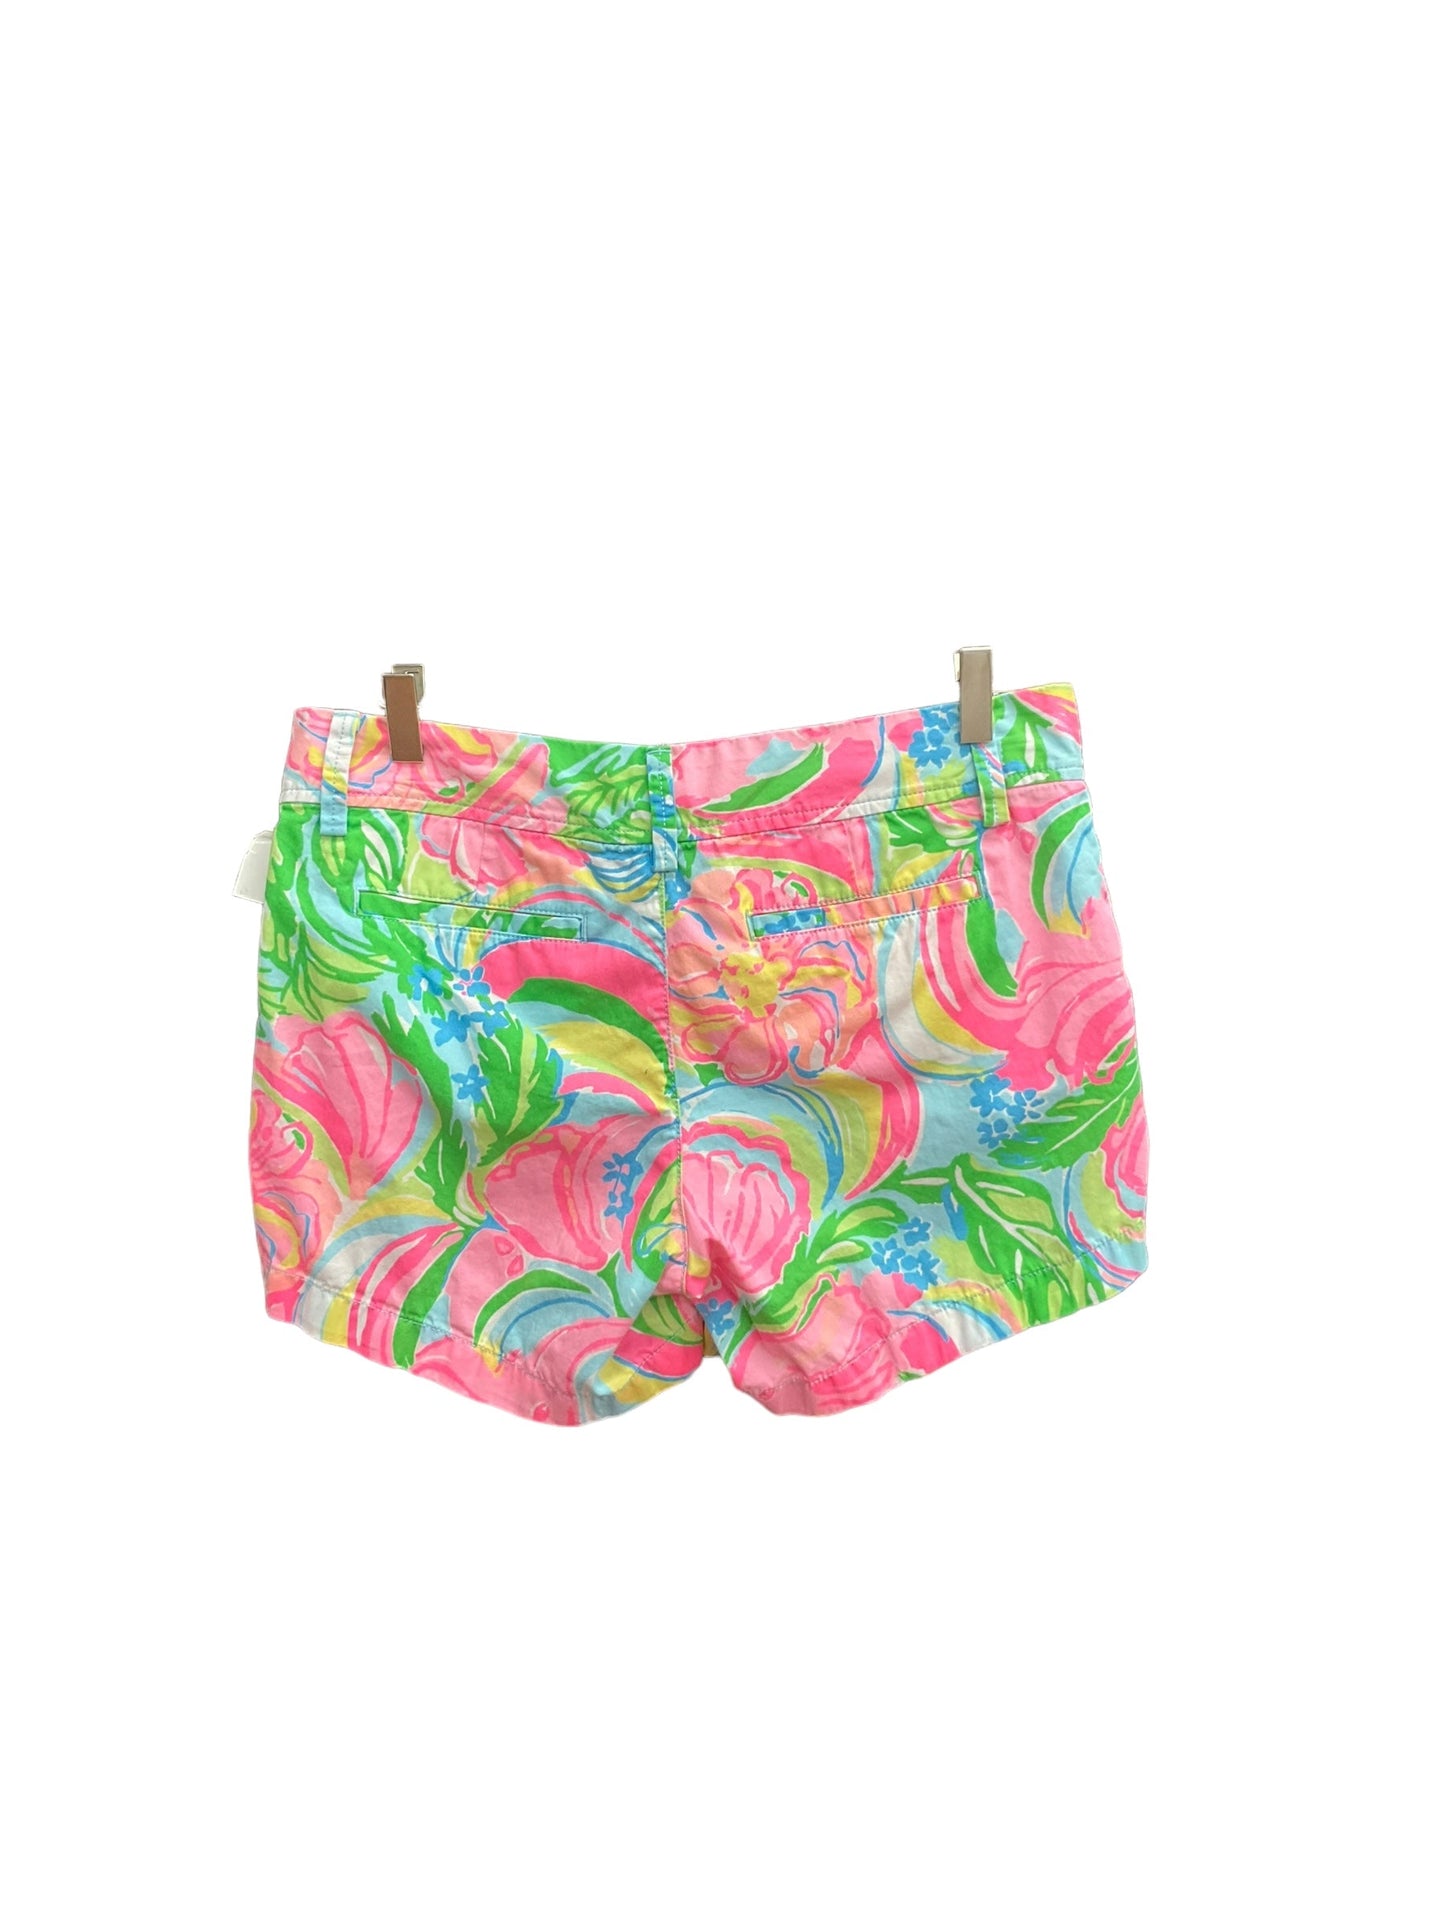 Multi-colored Shorts Lilly Pulitzer, Size 6